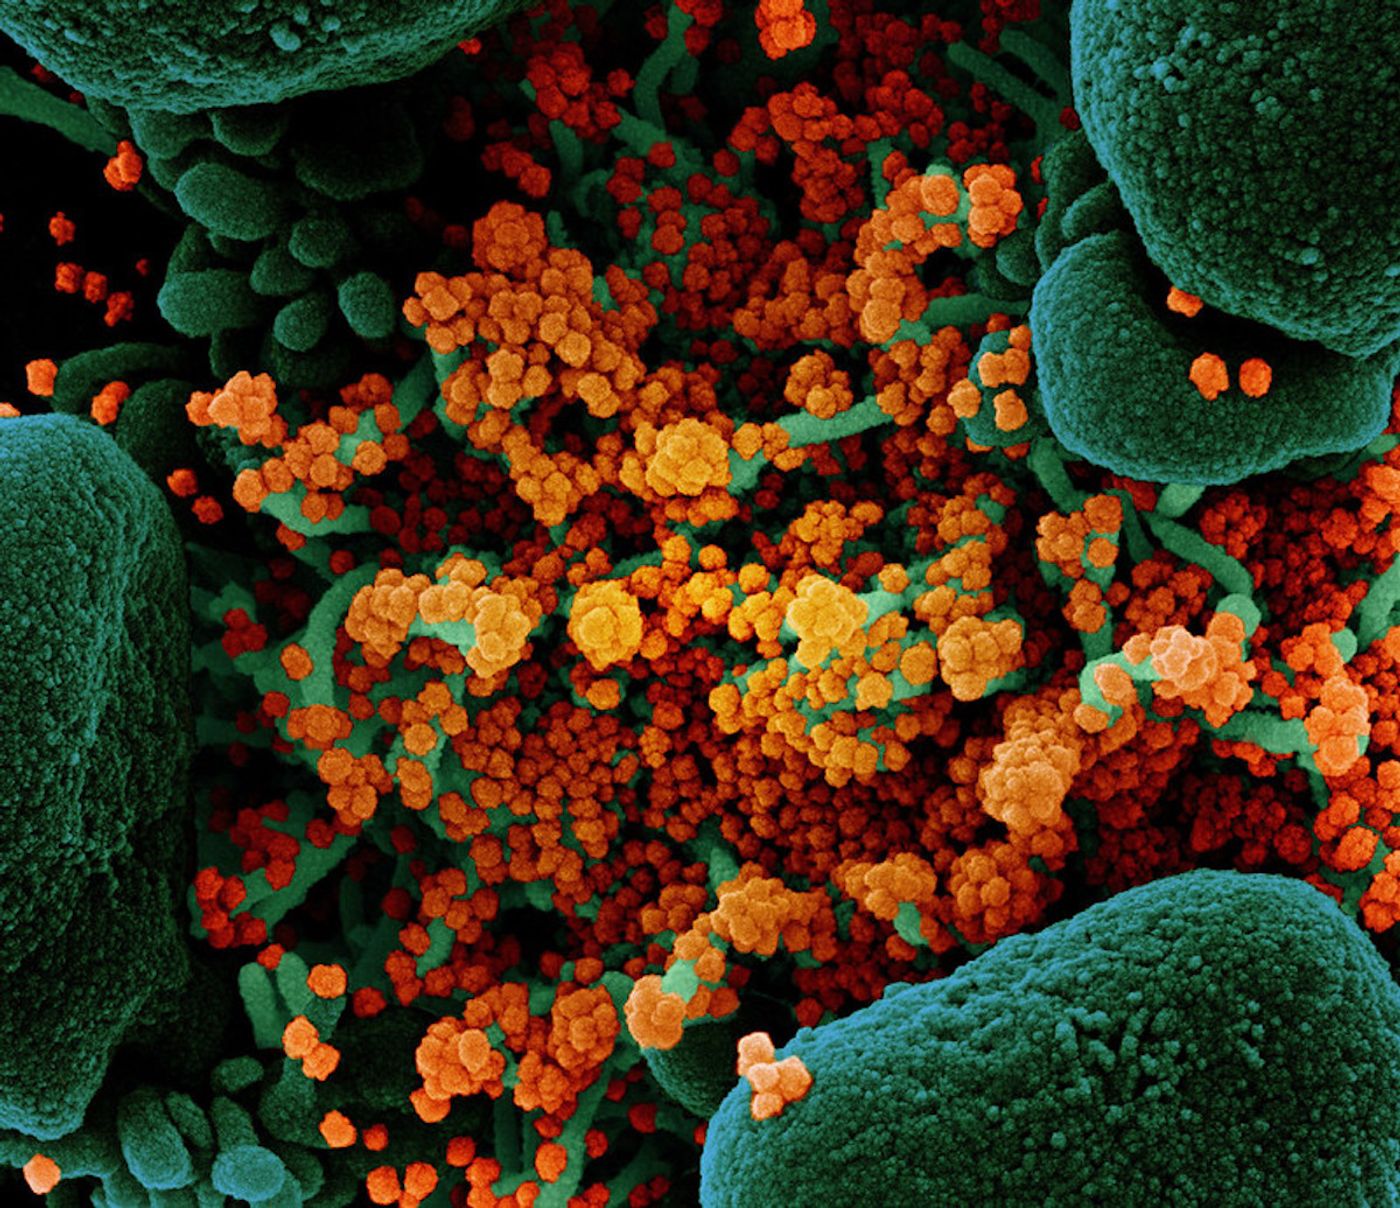 Colorized scanning electron micrograph of an apoptotic cell (green) heavily infected with SARS-COV-2 virus particles (orange), isolated from a patient sample. Image at the NIAID Integrated Research Facility (IRF) in Fort Detrick, Maryland. / Credit: NIAID